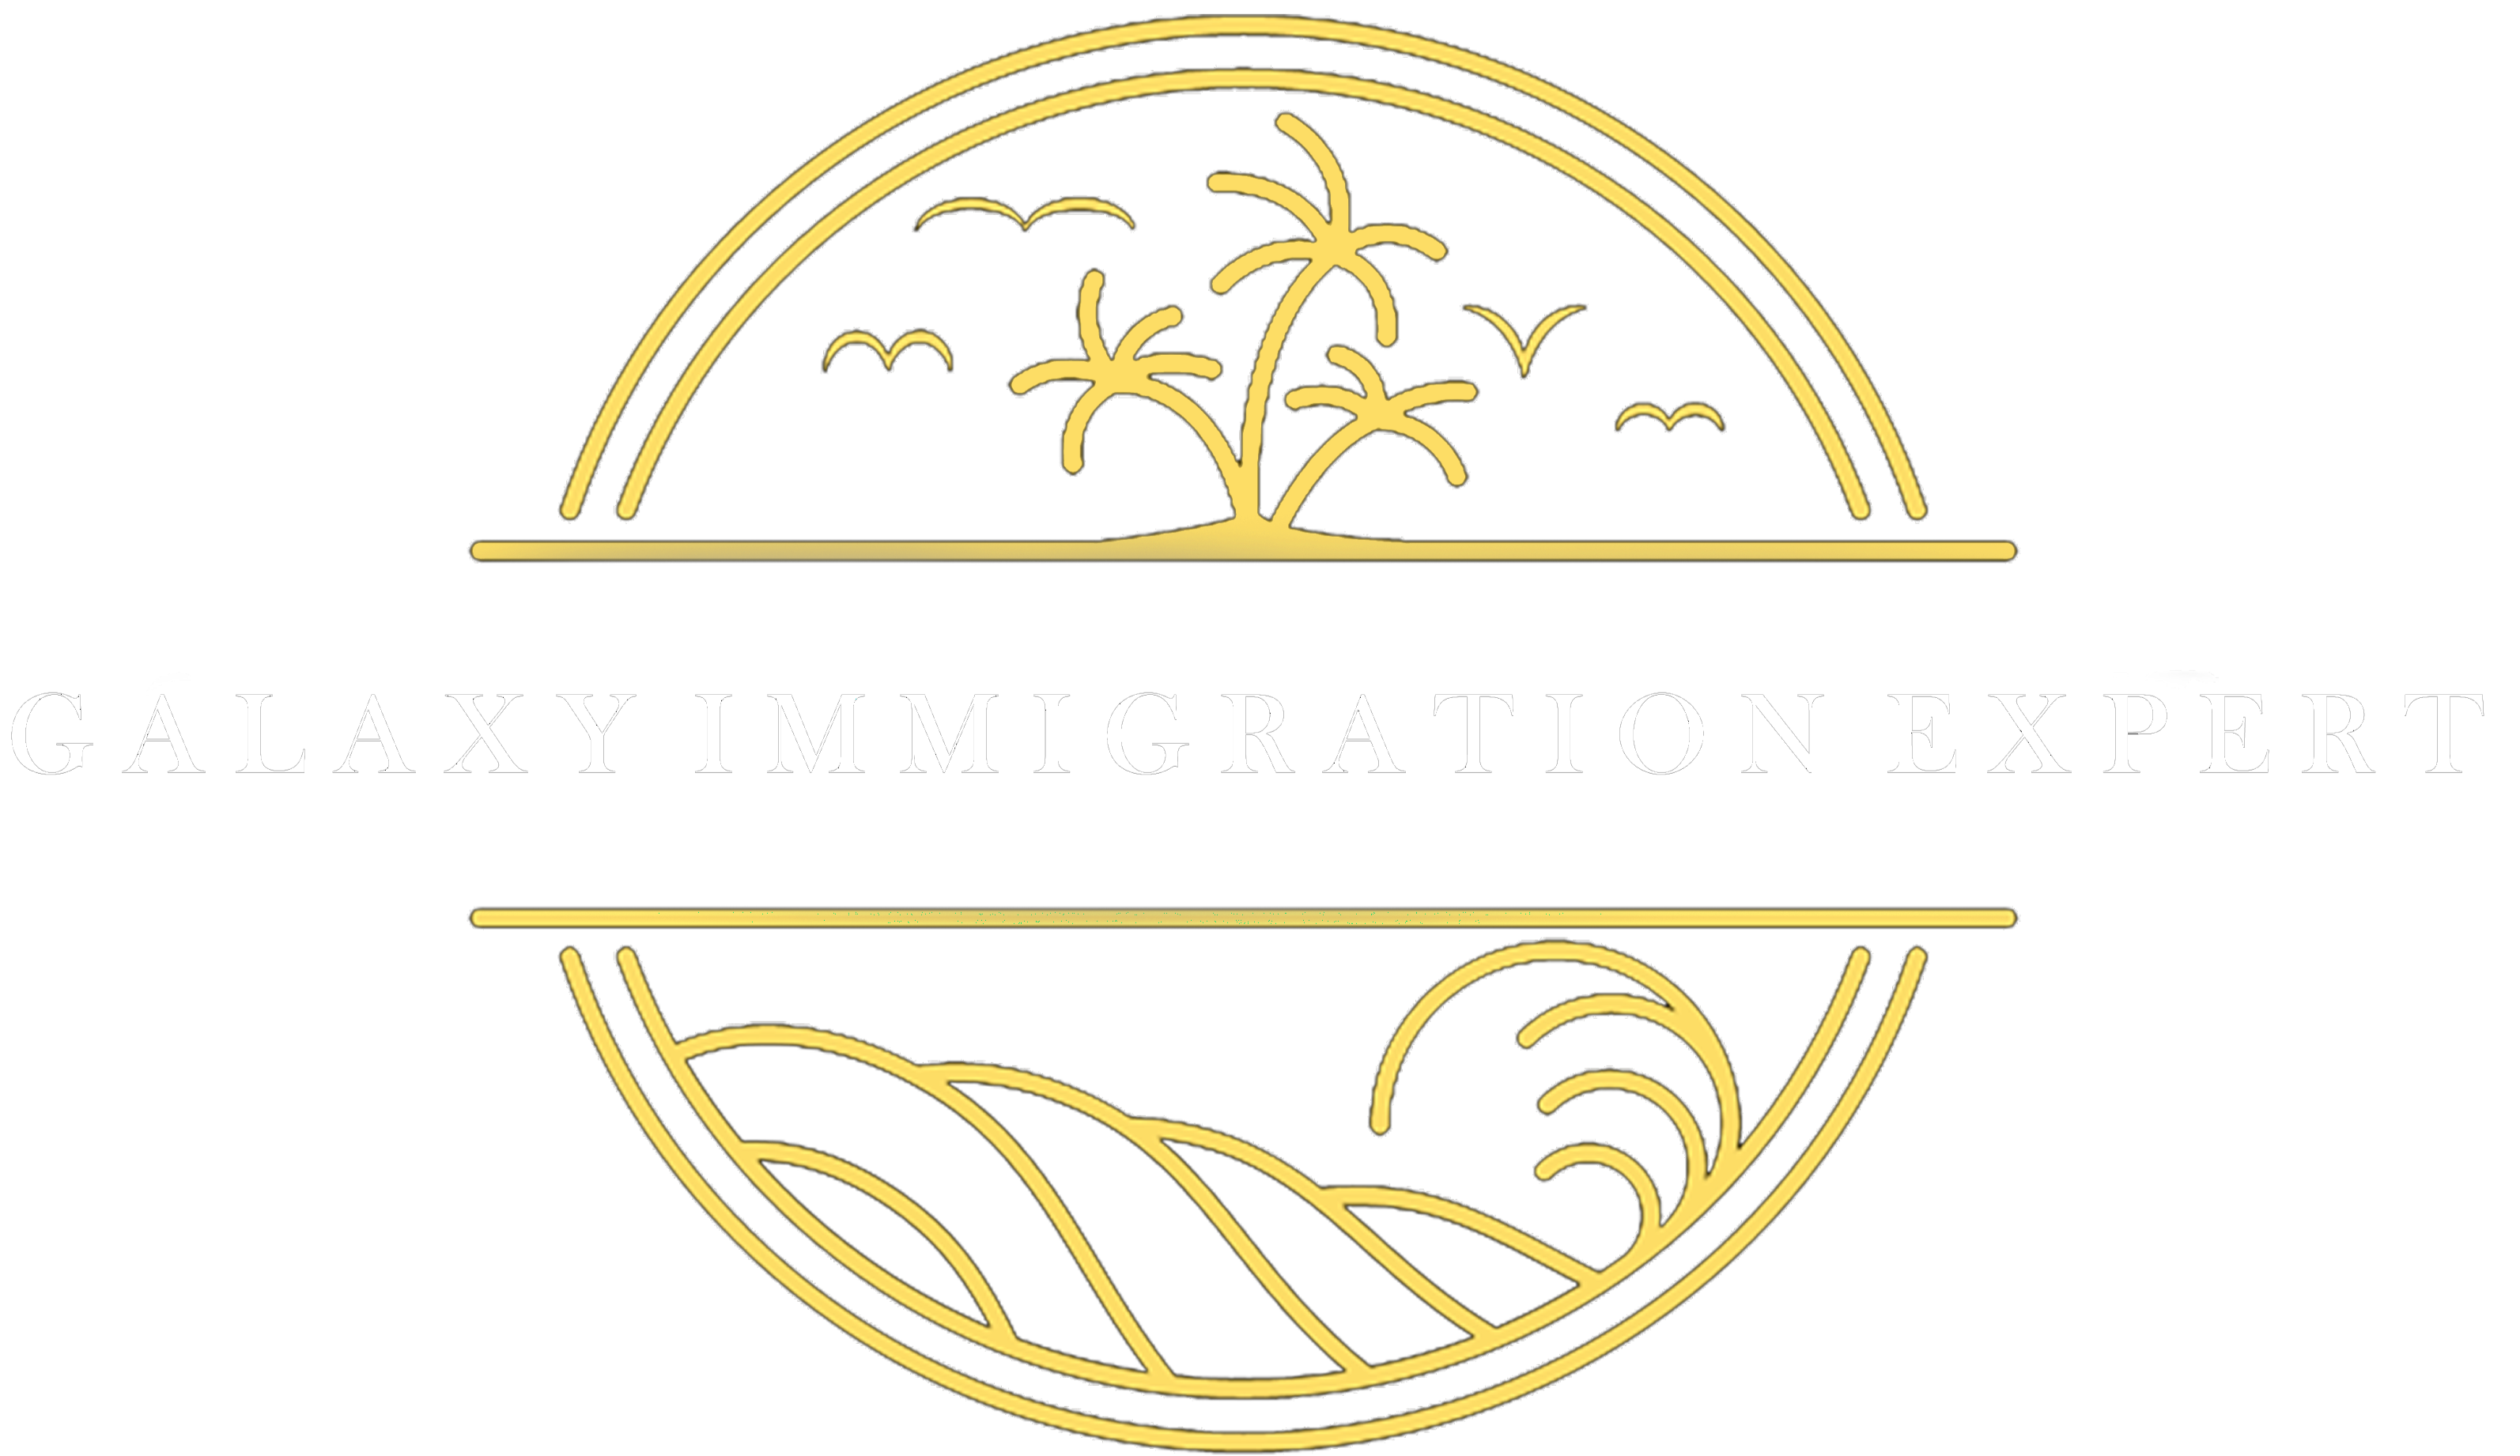 Galaxy Immigration Expert - Visa Immigration and Consultant